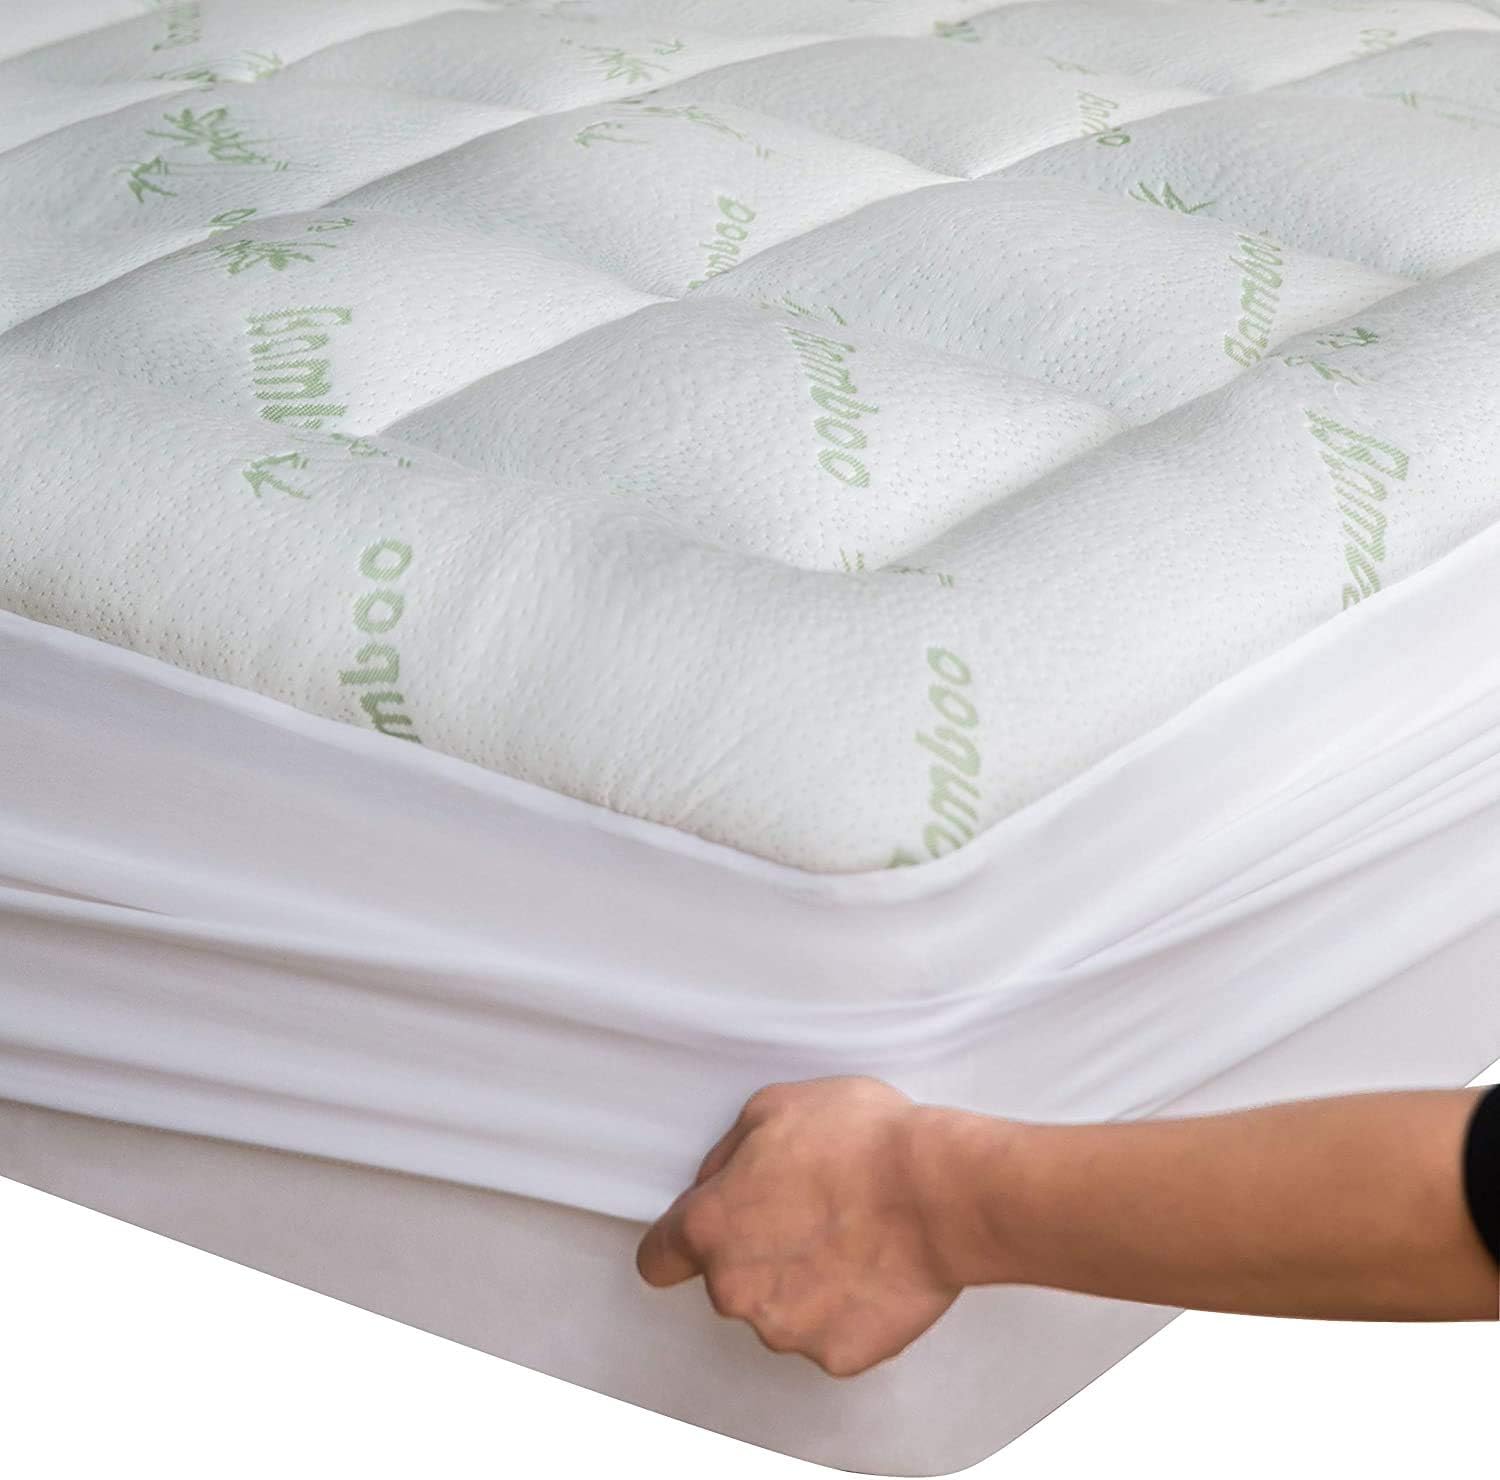 Bamboo Twin Extra Long XL Mattress Topper - Thick Cooling Breathable Pillow Top Mattress Pad for Back Pain Relief - Deep Pocket Topper Fits 8-20 Inches (Viscose Made from Bamboo, 39x80 Inches)